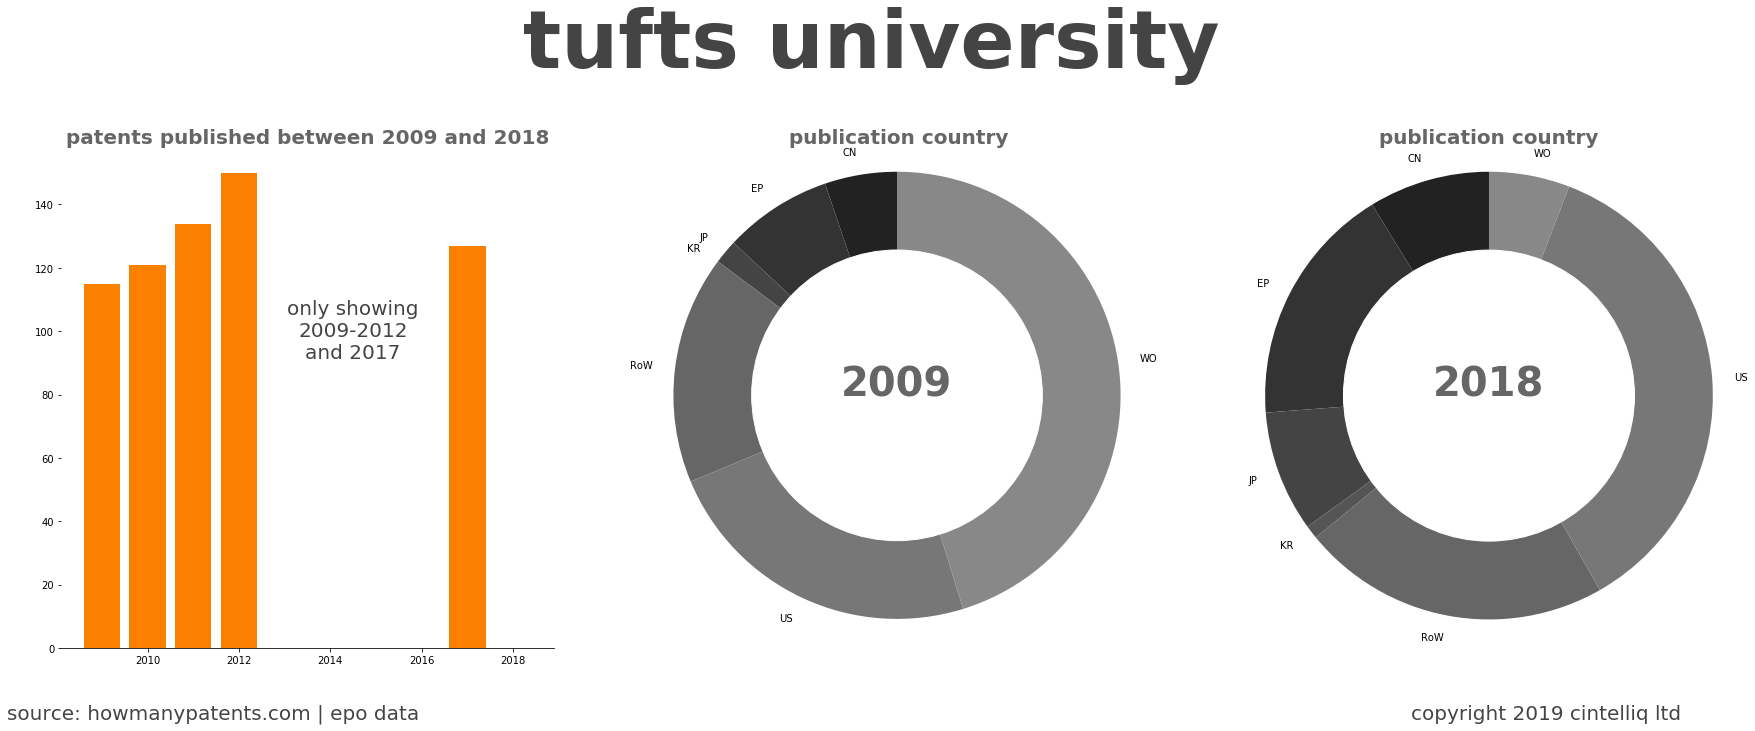 summary of patents for Tufts University